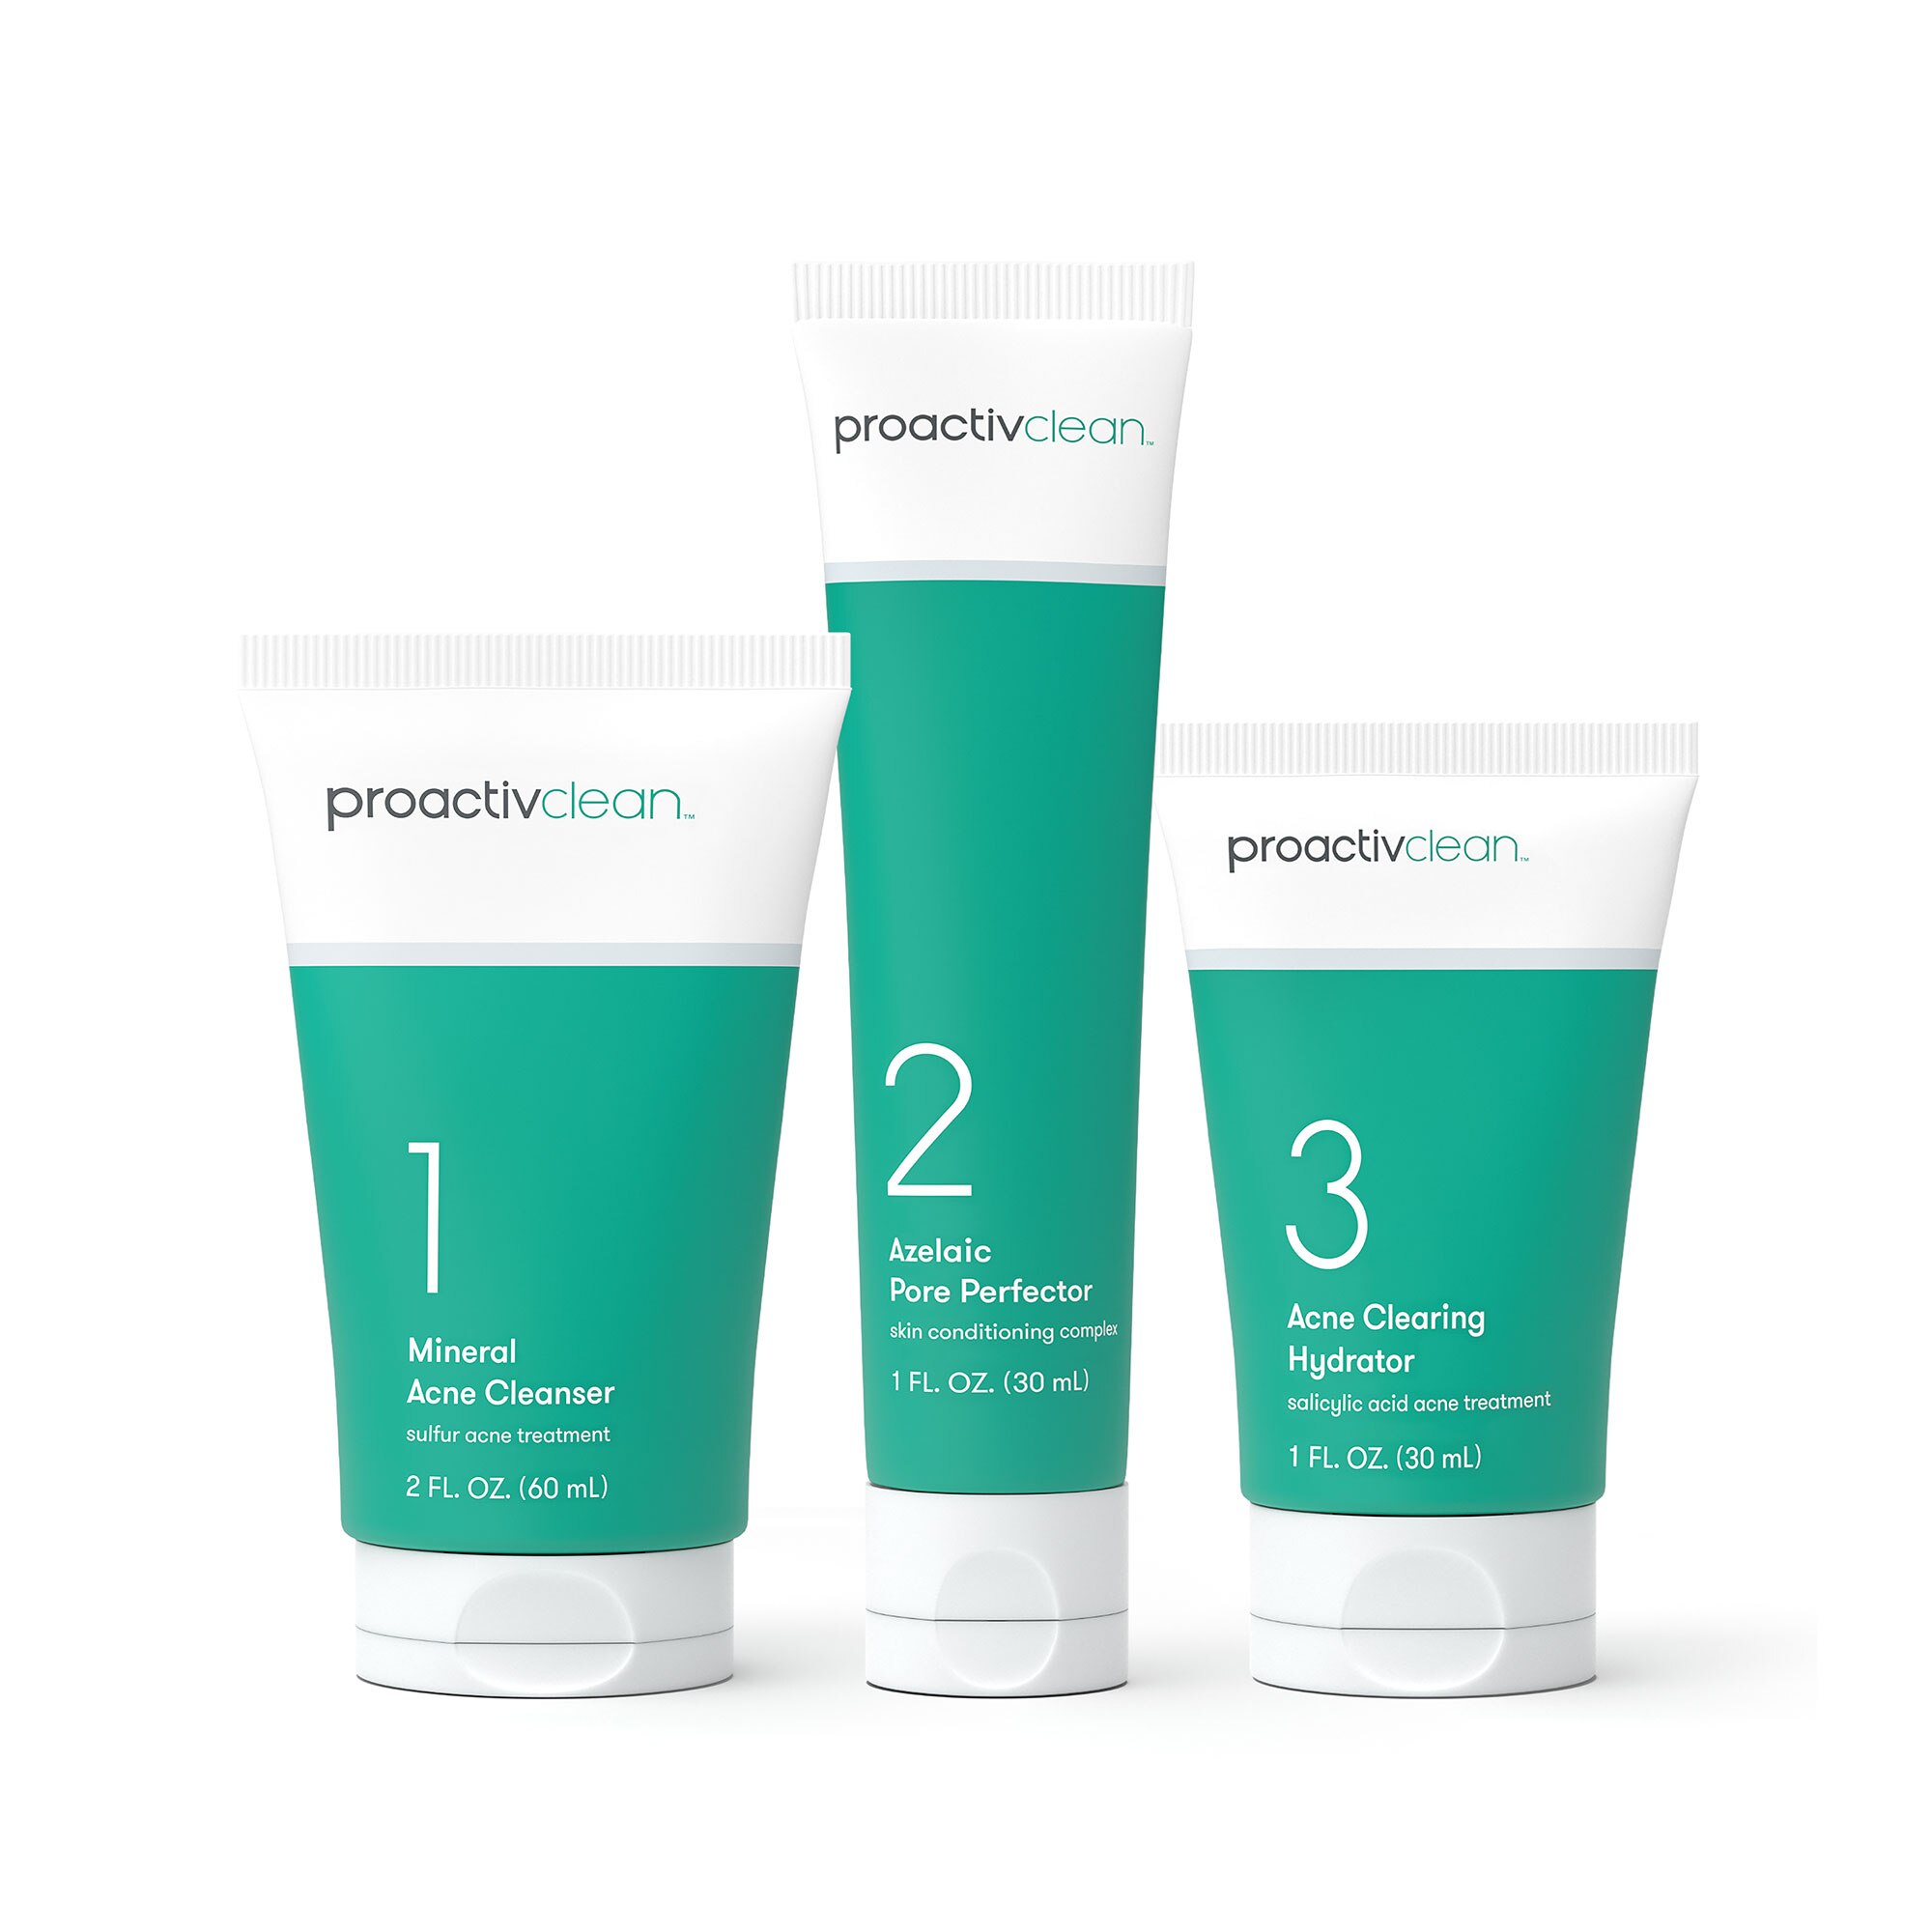 Proactiv Clean 3-Step Acne Treatment Routine